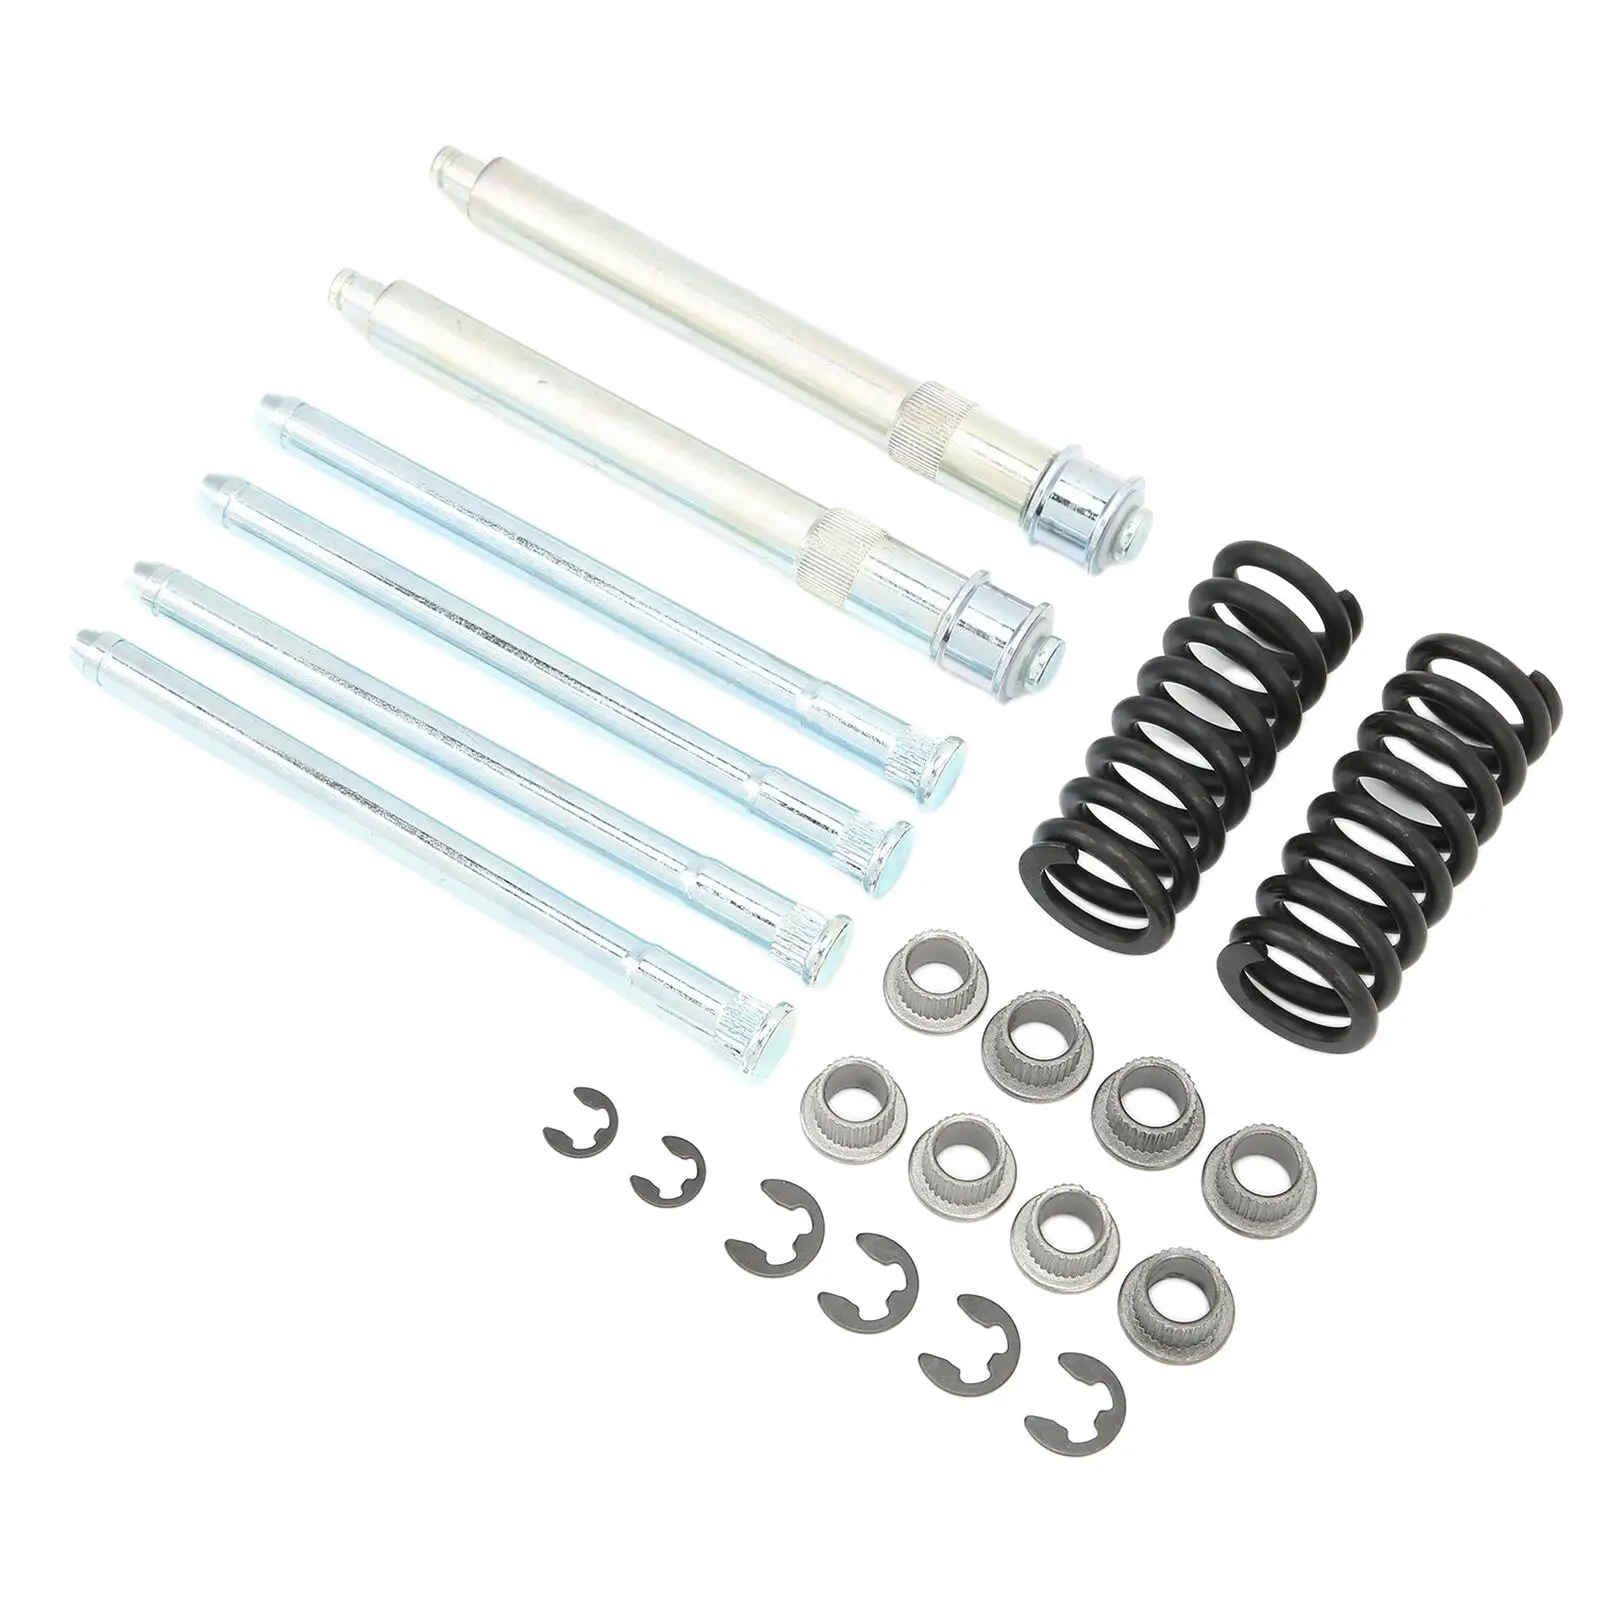 1 Set Door Hinge Pin and Spring with Bushing Kit, for Chevy GMC SUV, Easy to Install, Durable Metal, Vehicle Car Parts